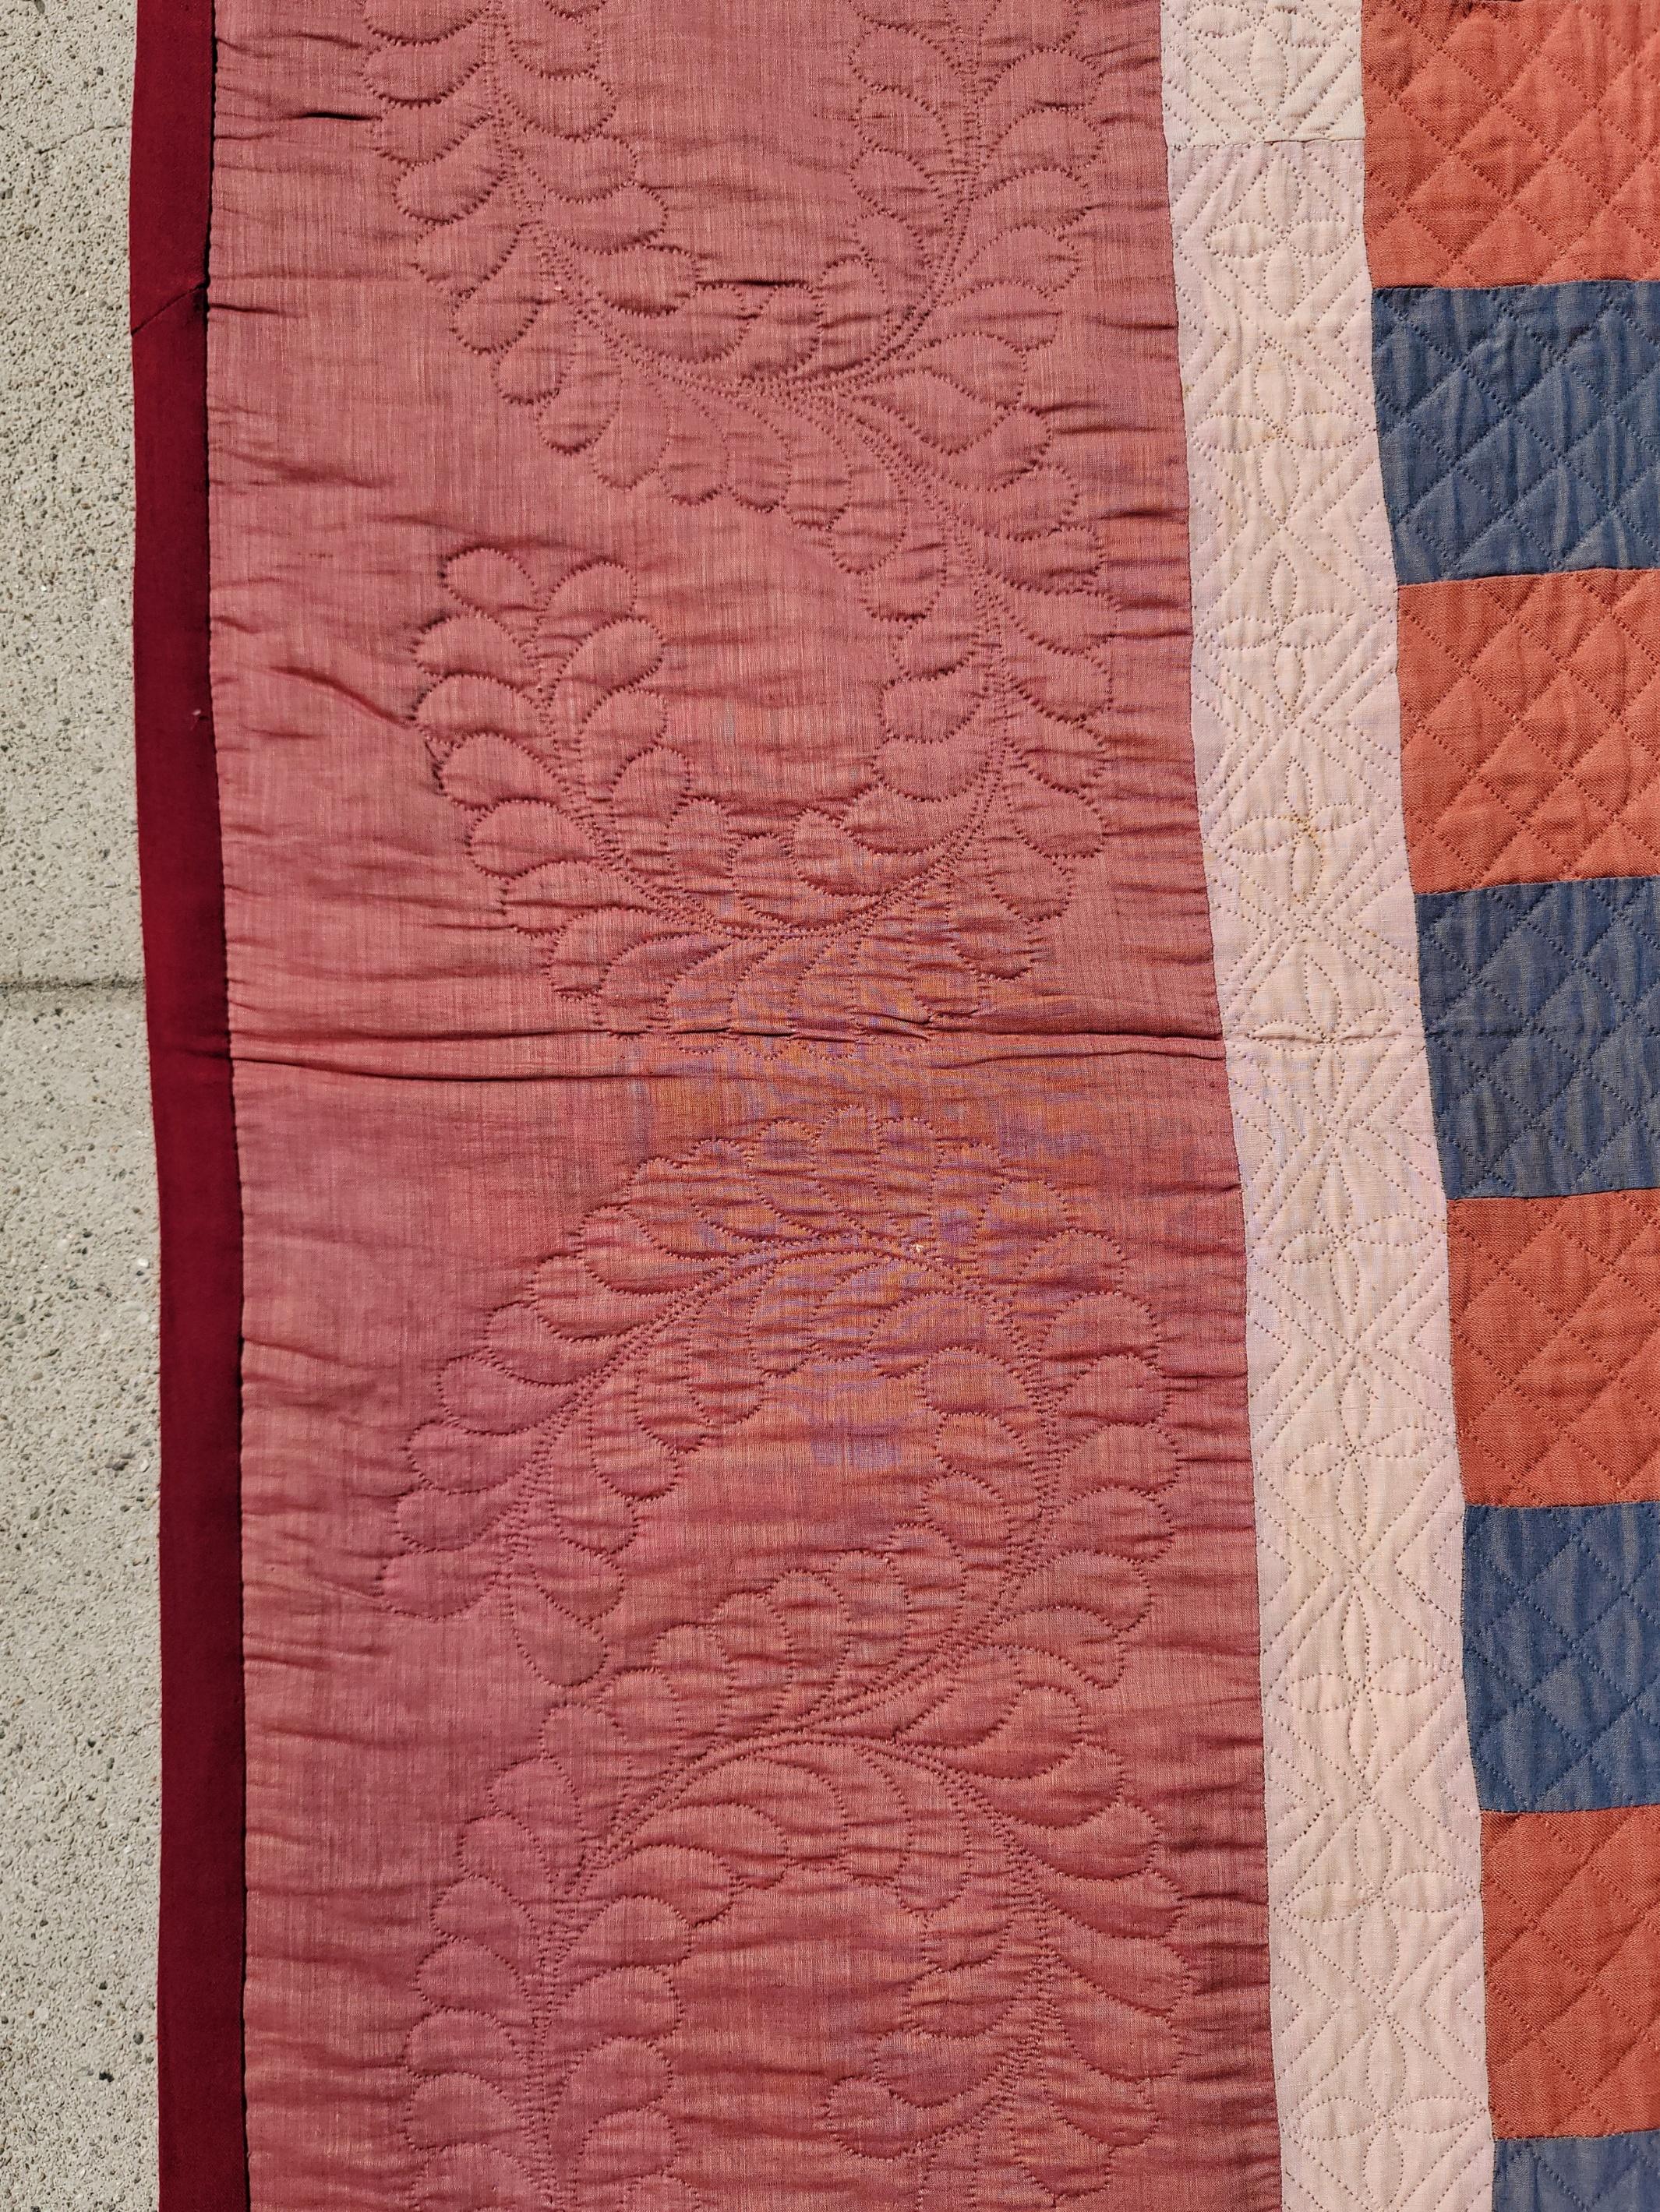 This fine all wool bars quilt is from Lancaster County, Pennsylvania and has very fine tight quilting & in very good condition. The simple cool colors are also amazing as it goes with any decor.This wool contained or bars in a square are at a